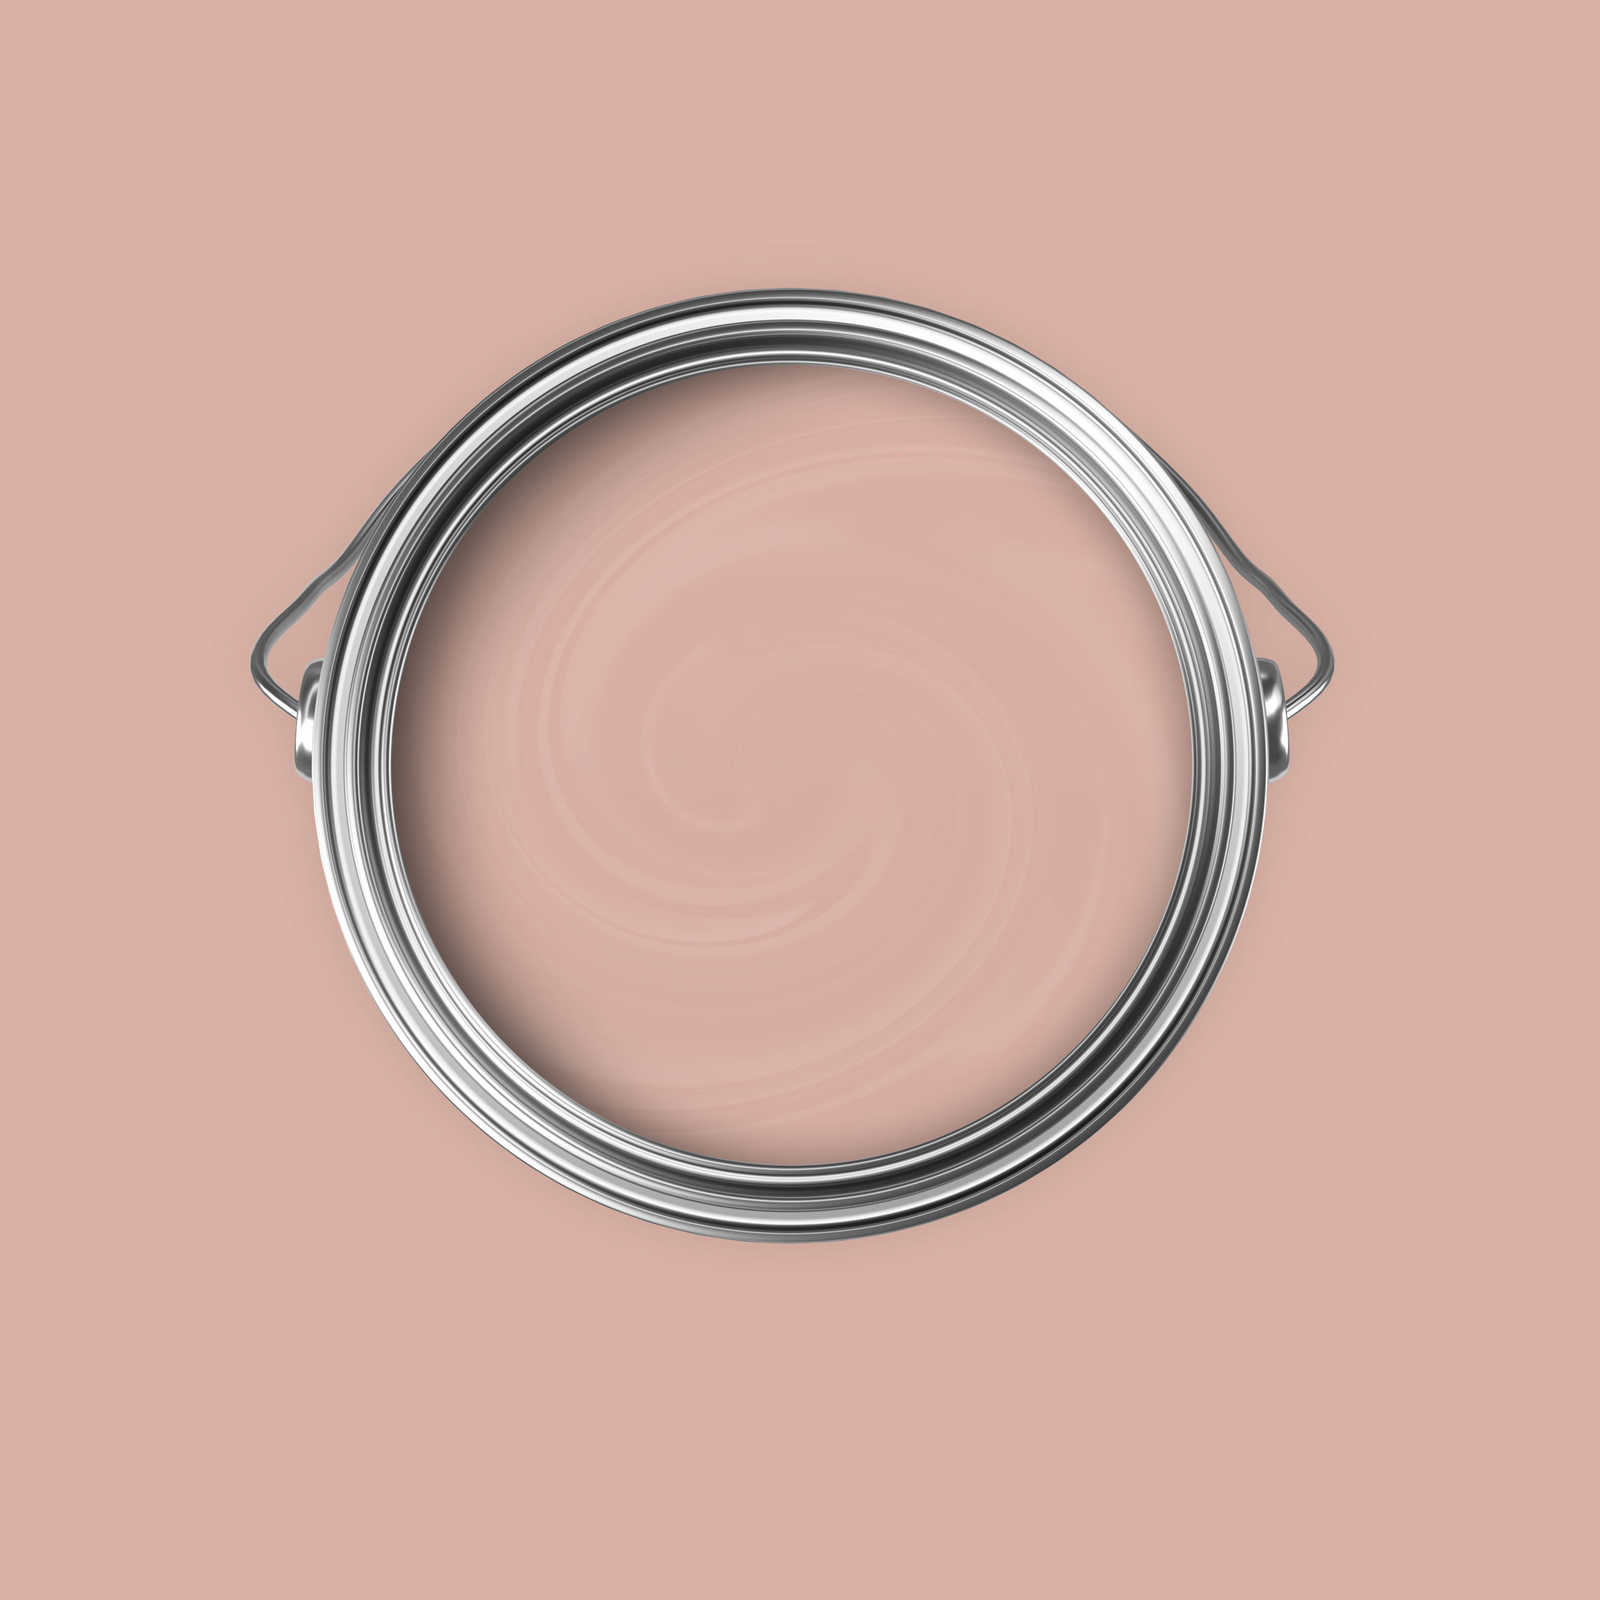             Premium Wall Paint Soft Salmon »Natural Nude« NW1009 – 5 litre
        